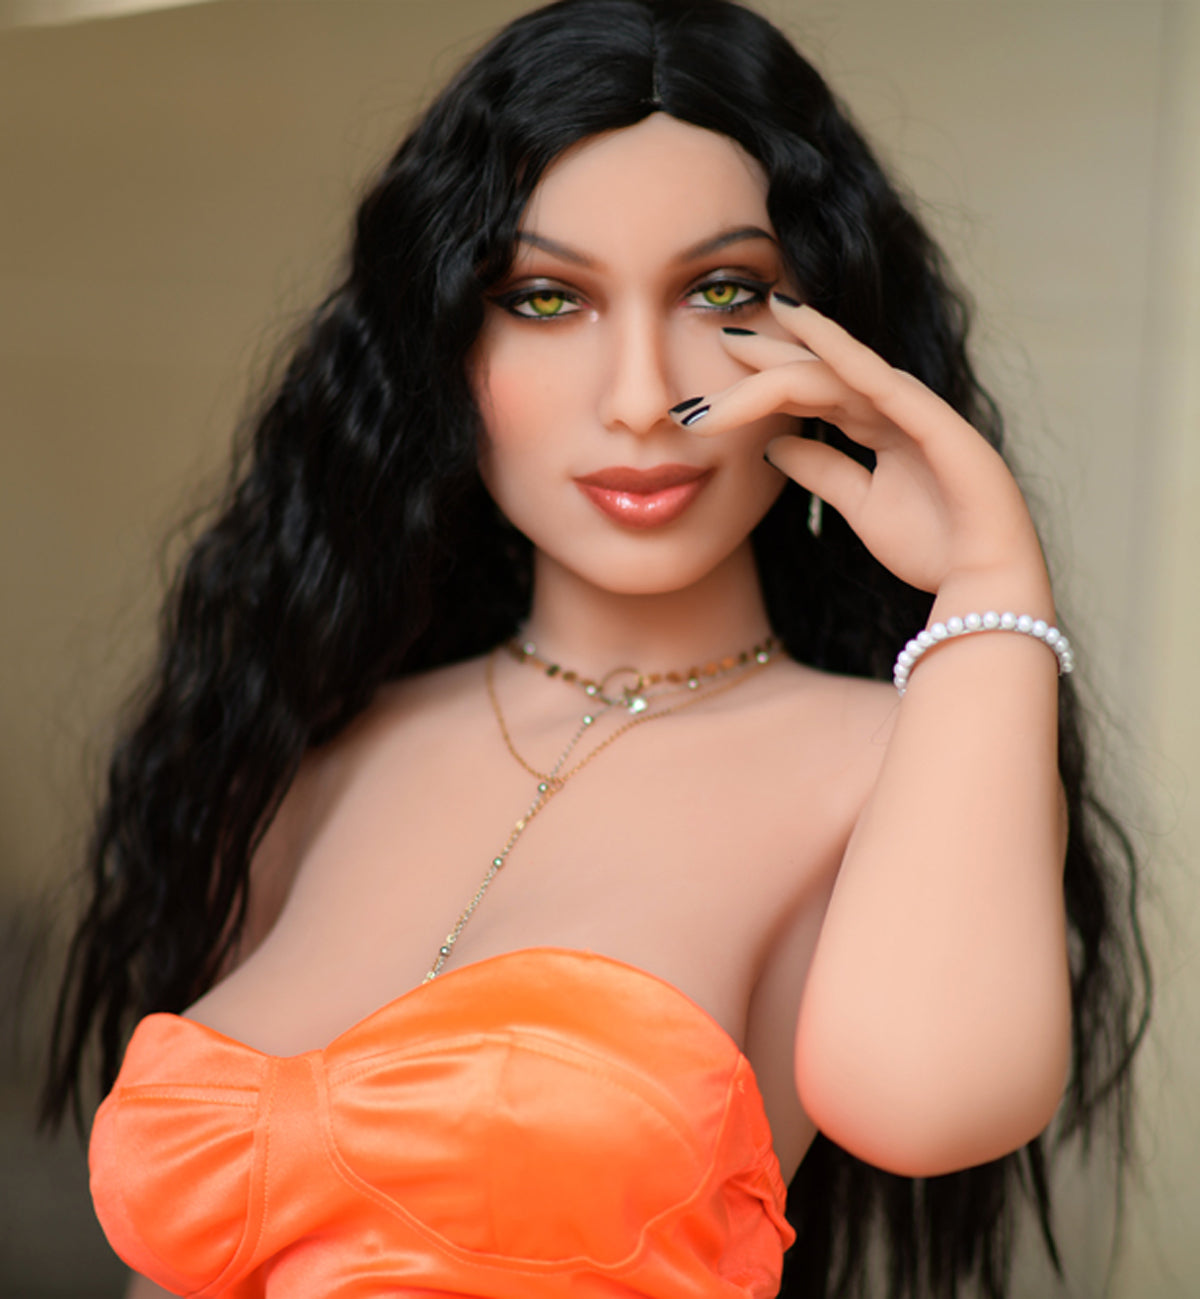 6YE Doll 151 cm TPE - #147 (USA) | Buy Sex Dolls at DOLLS ACTUALLY